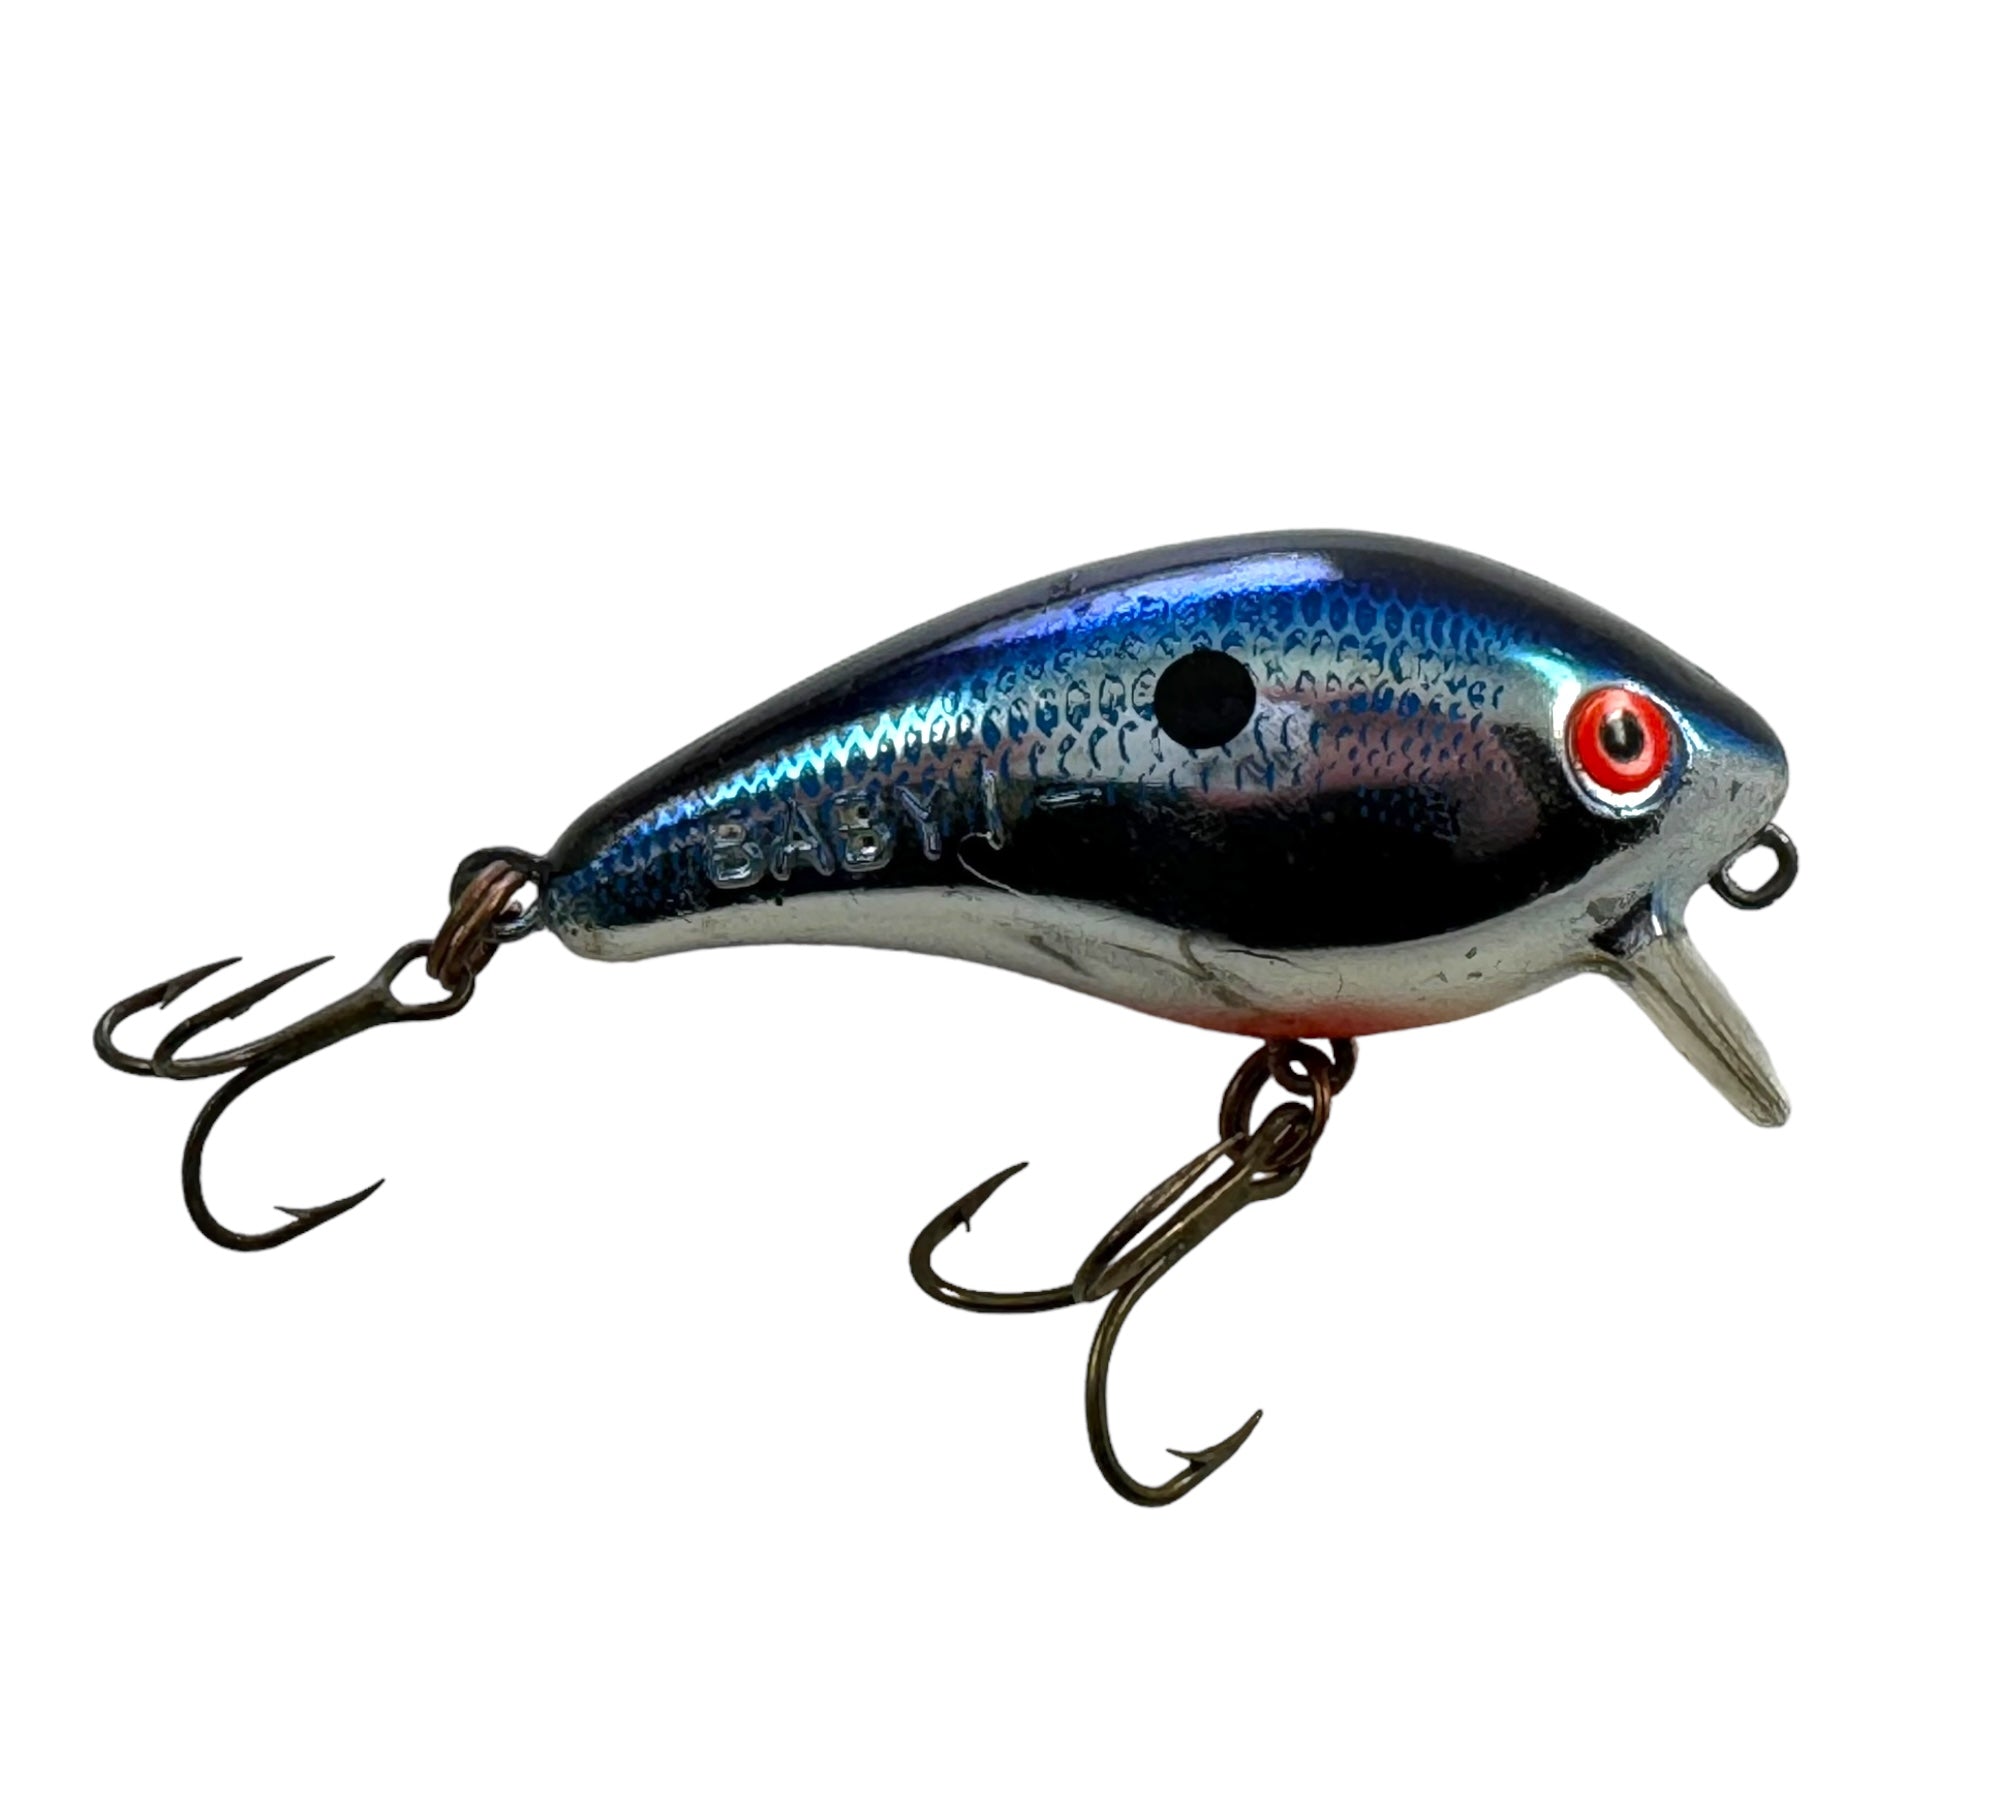 MANN'S BAIT COMPANY BABY 1- Fishing Lure • CHROME BLUE BACK – Toad Tackle